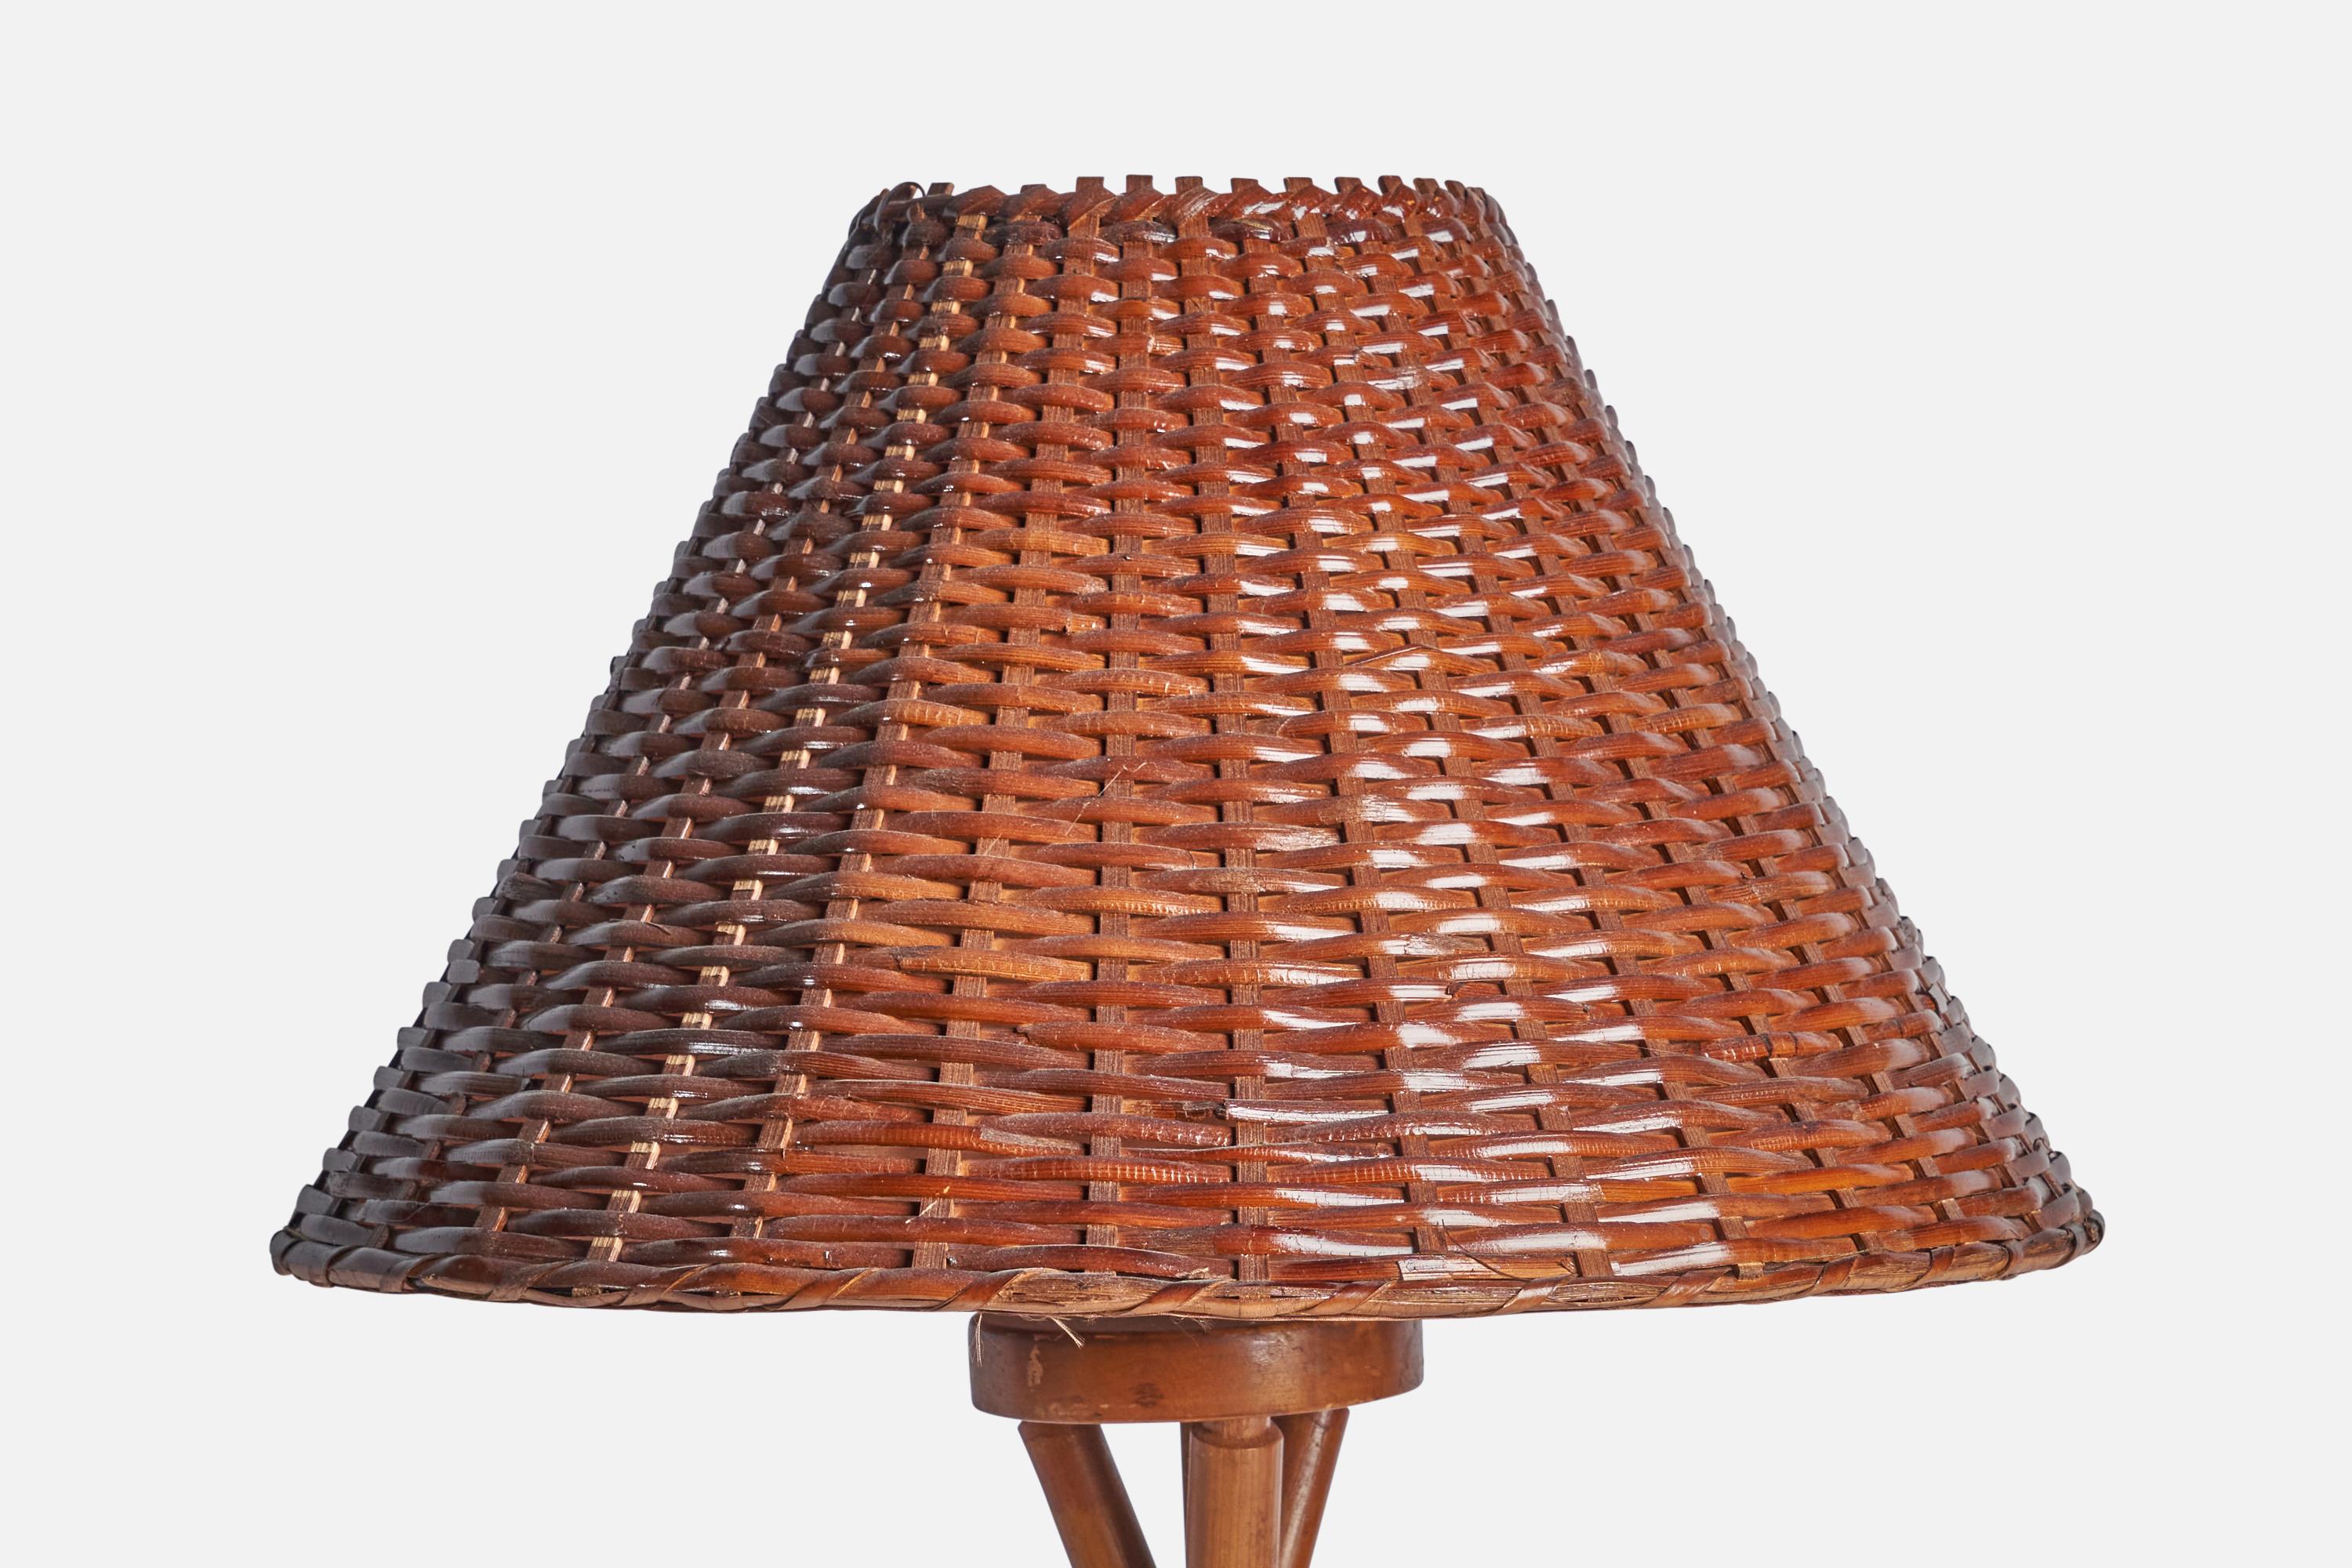 Mid-20th Century American Designer, Table Lamps, Bamboo, Rattan, USA, 1950s For Sale